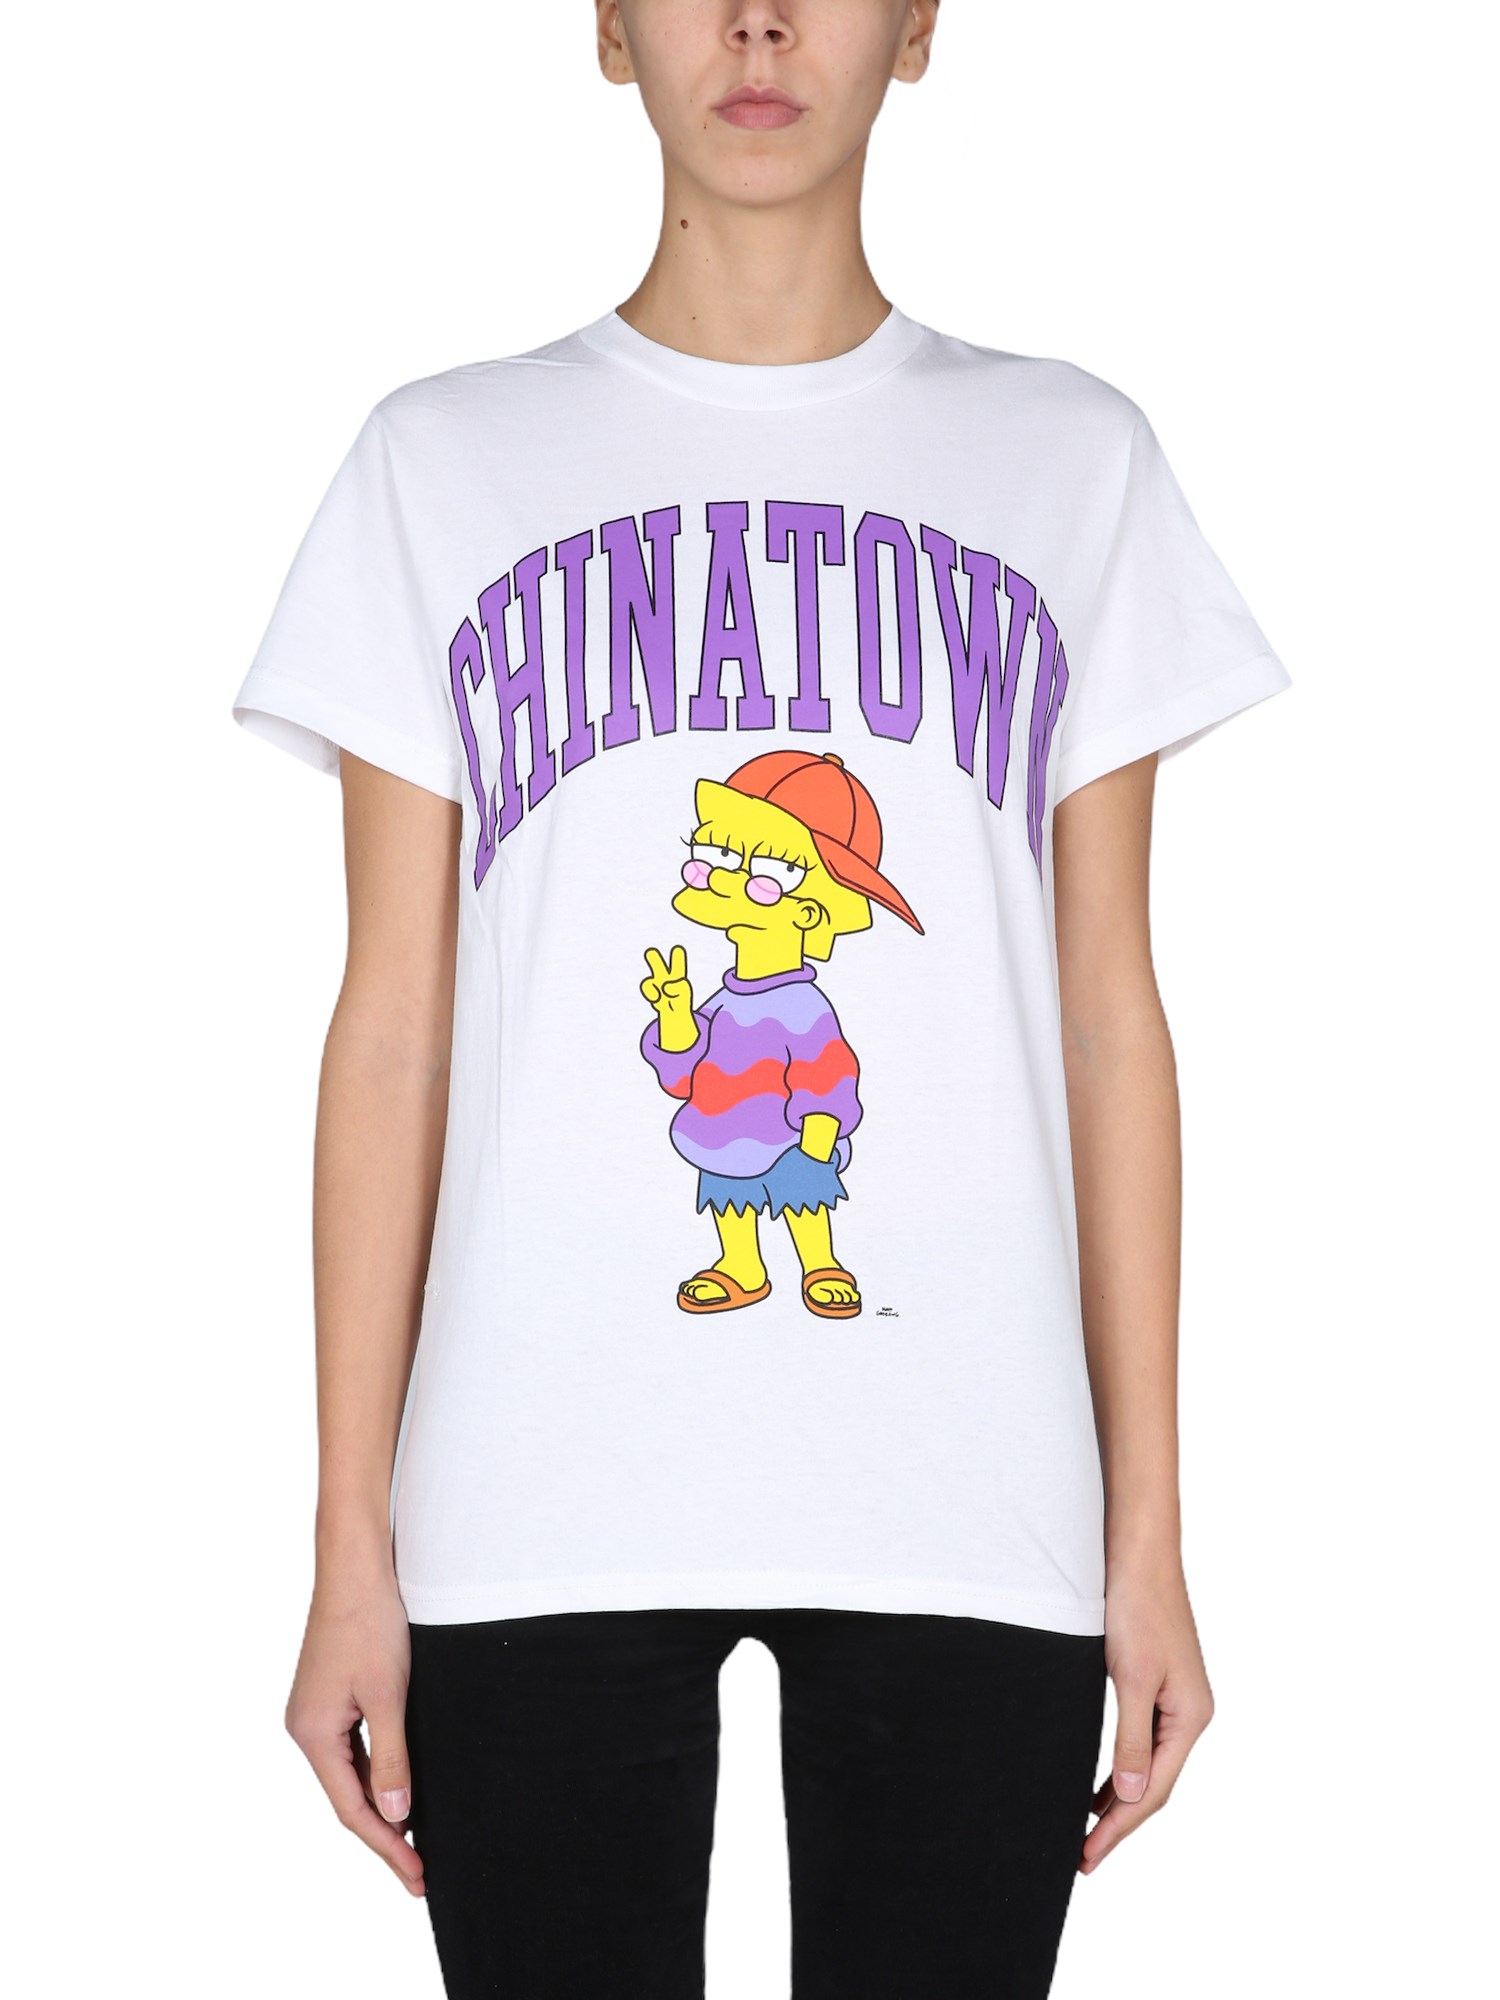 chinatown market x the simpsons "like you know whatever" t-shirt